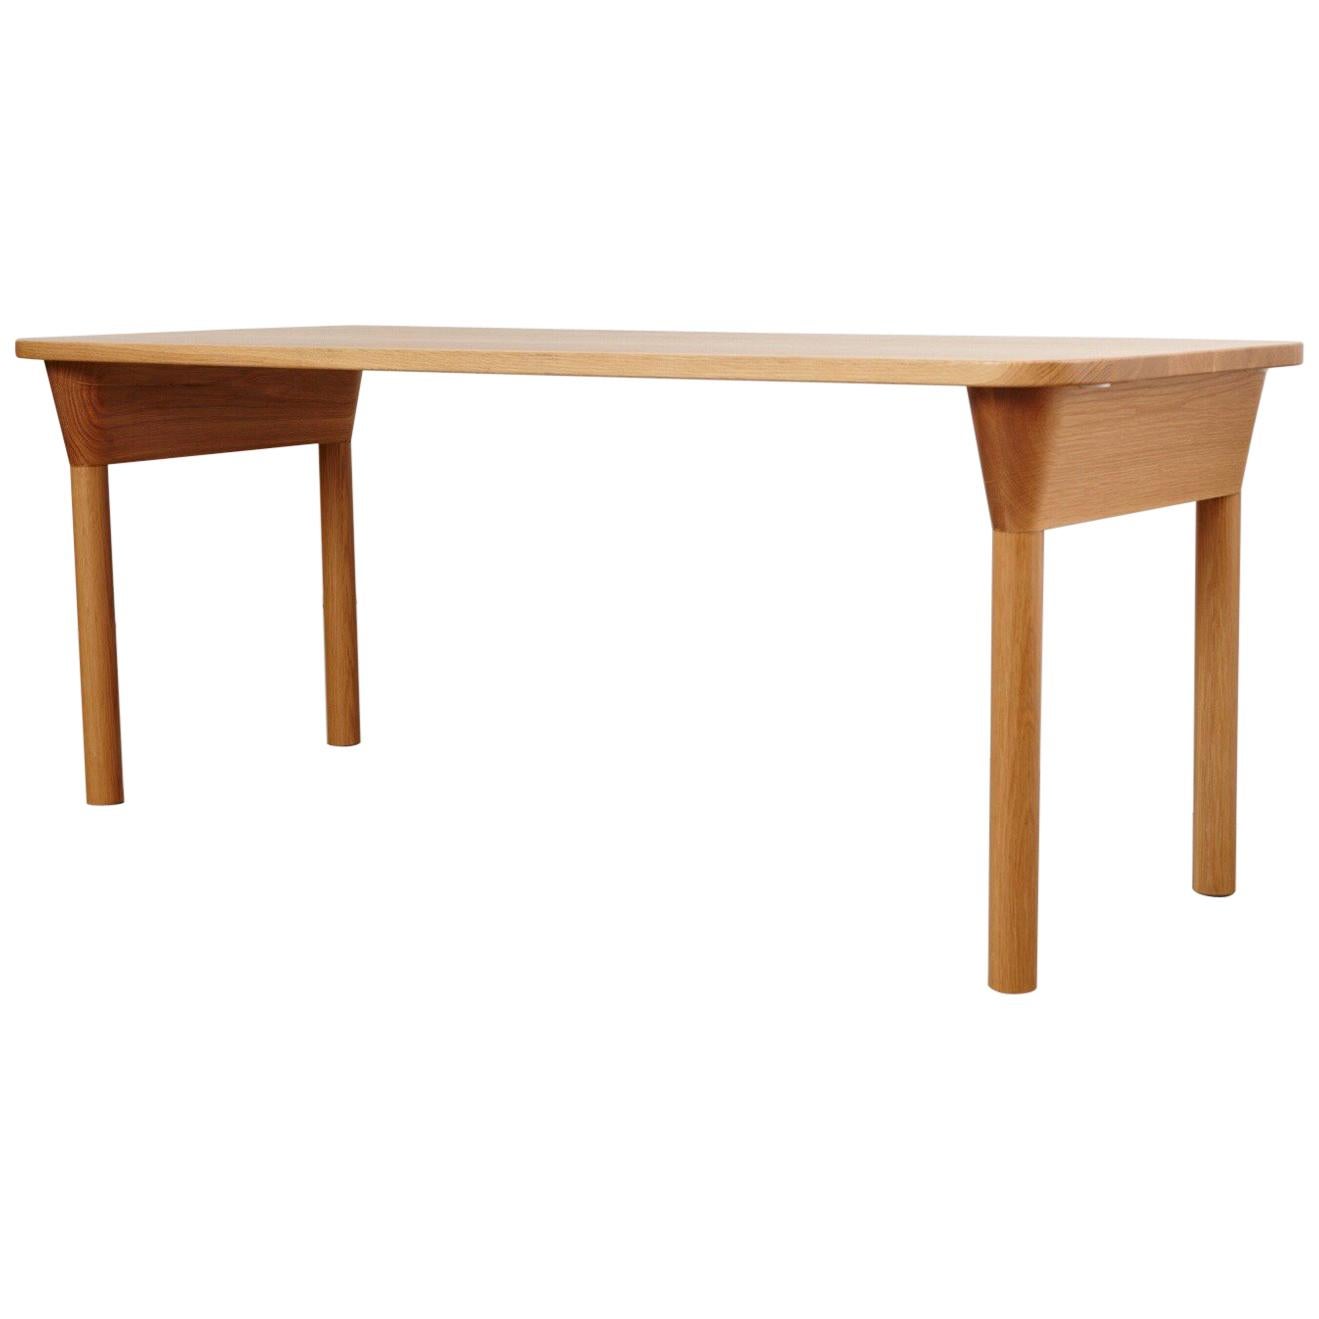 “Column Table” Minimalist Solid Wood Oak Dining Table or Desk For Sale